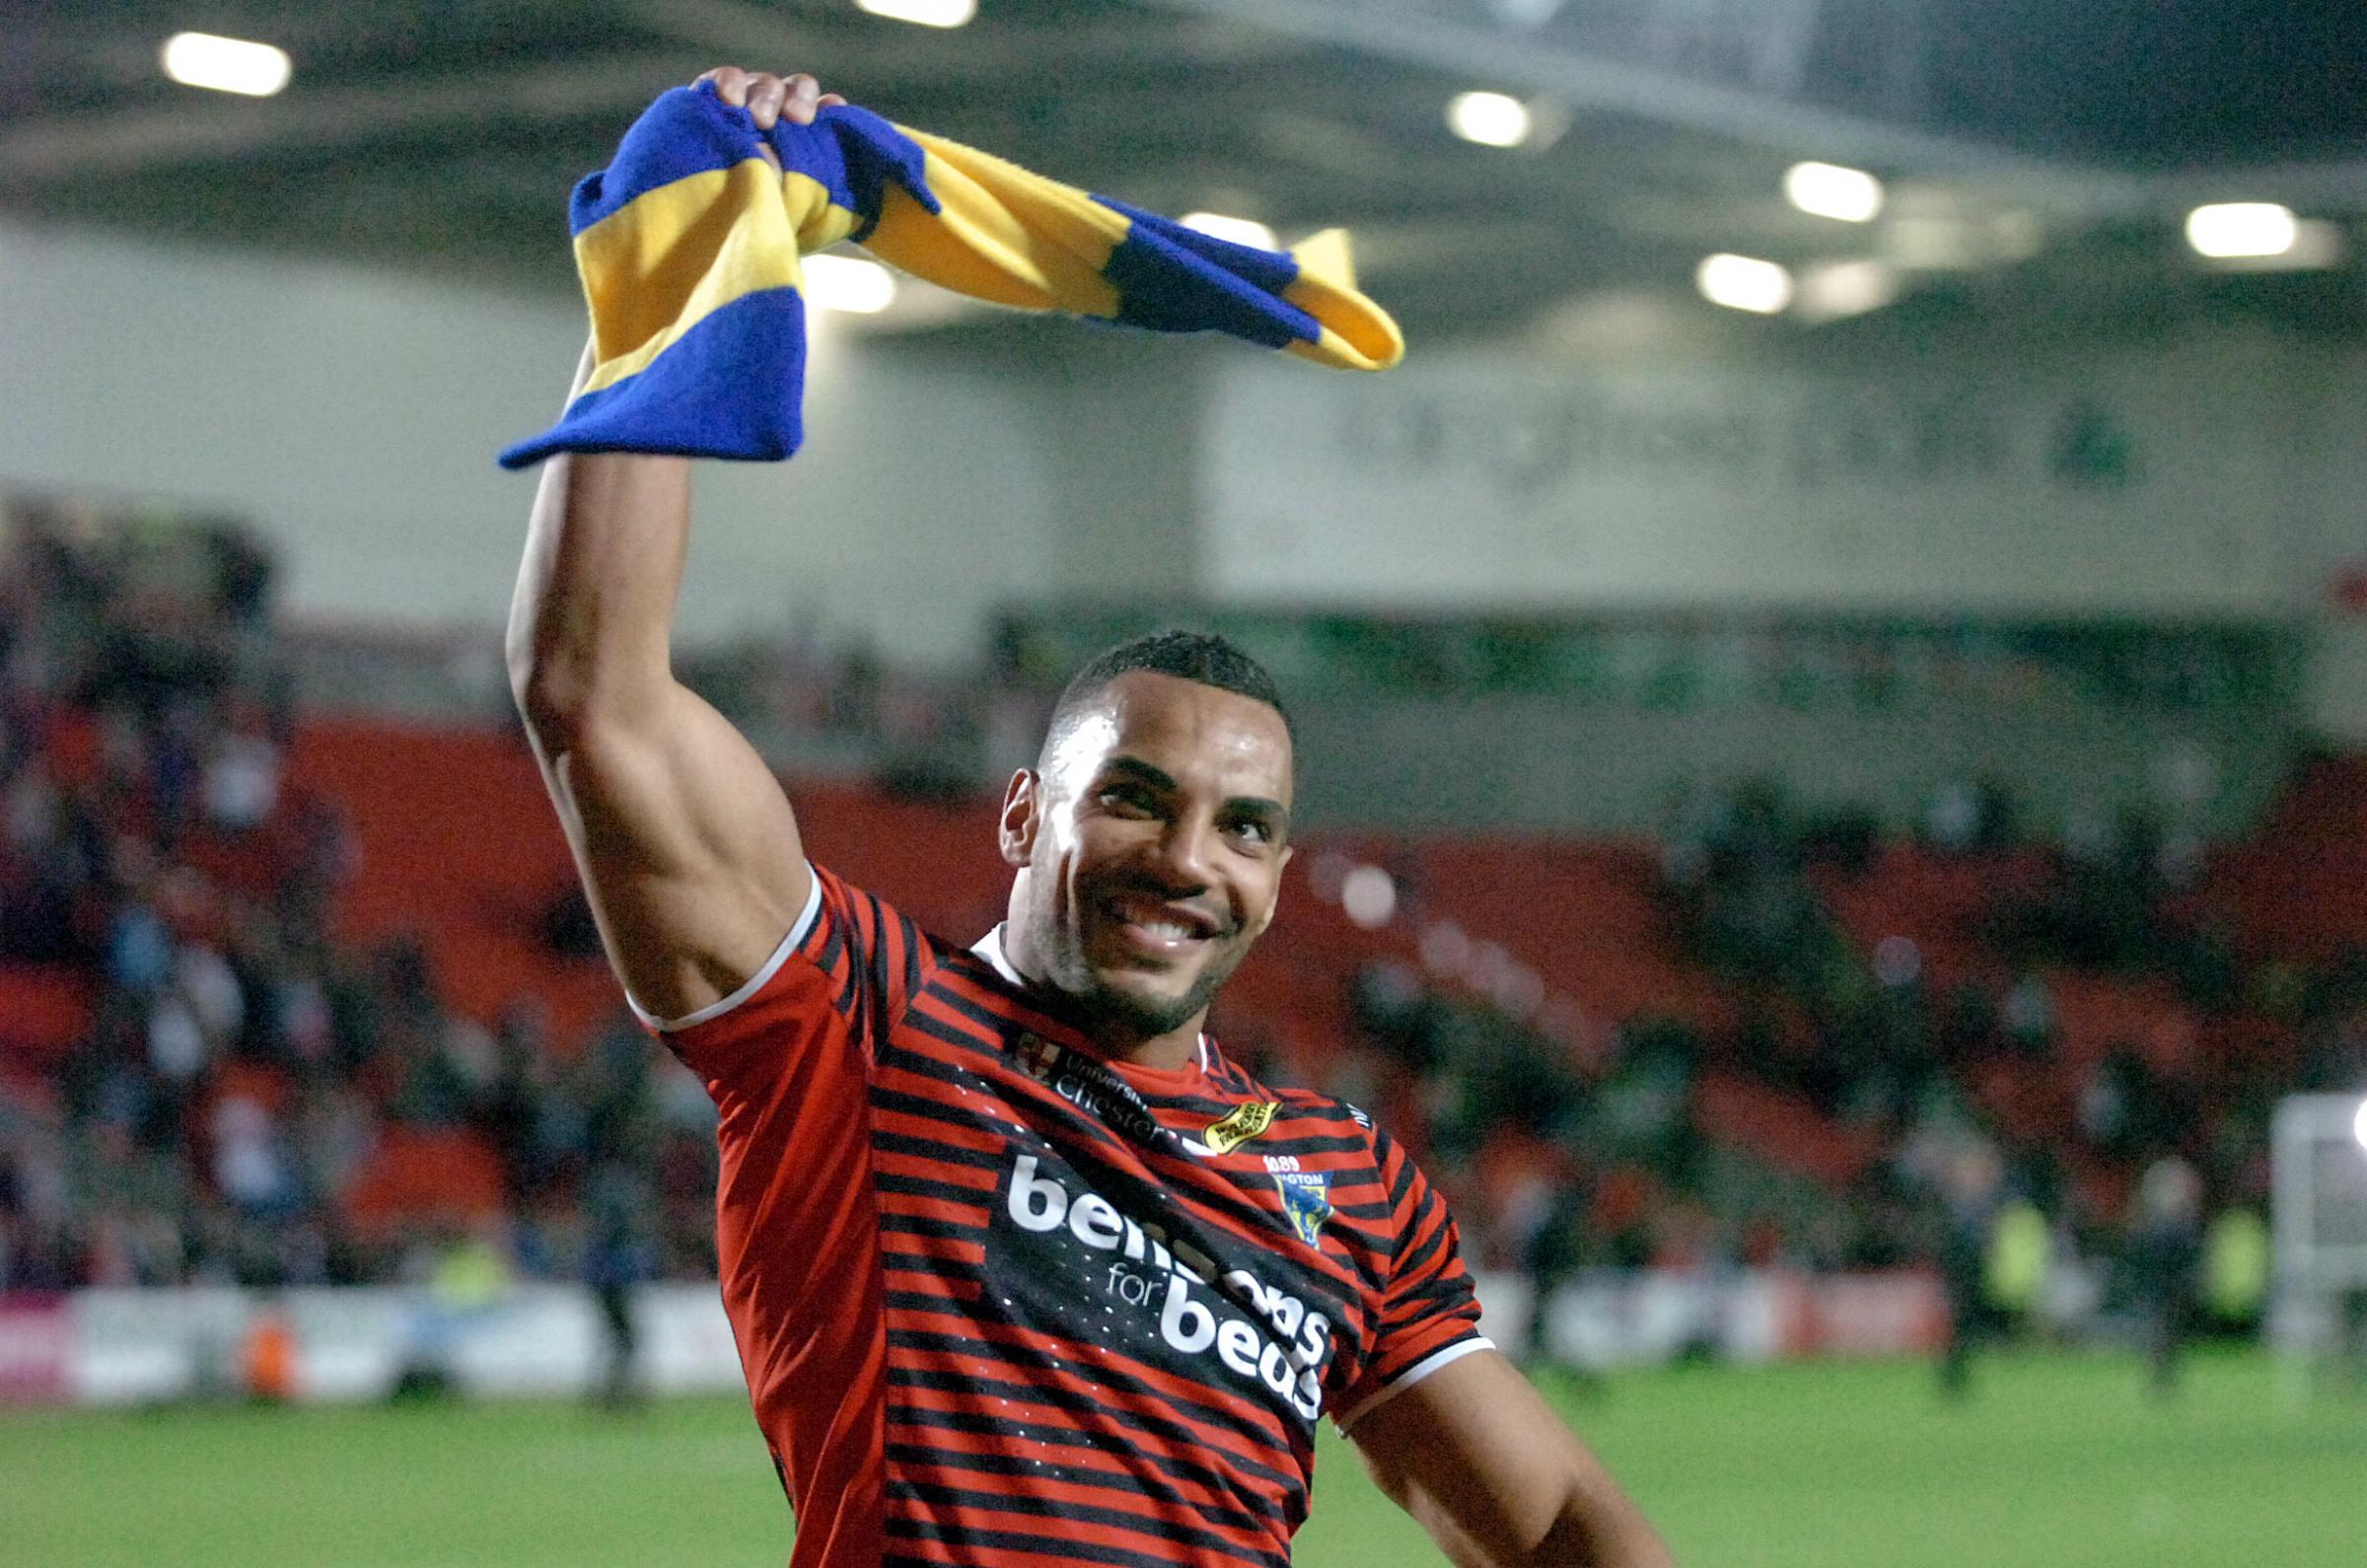 Ryan Atkins celebrates the 2012 Super League semi-final win at the Totally Wicked Stadium (then Langtree Park). Picture by Mike Boden